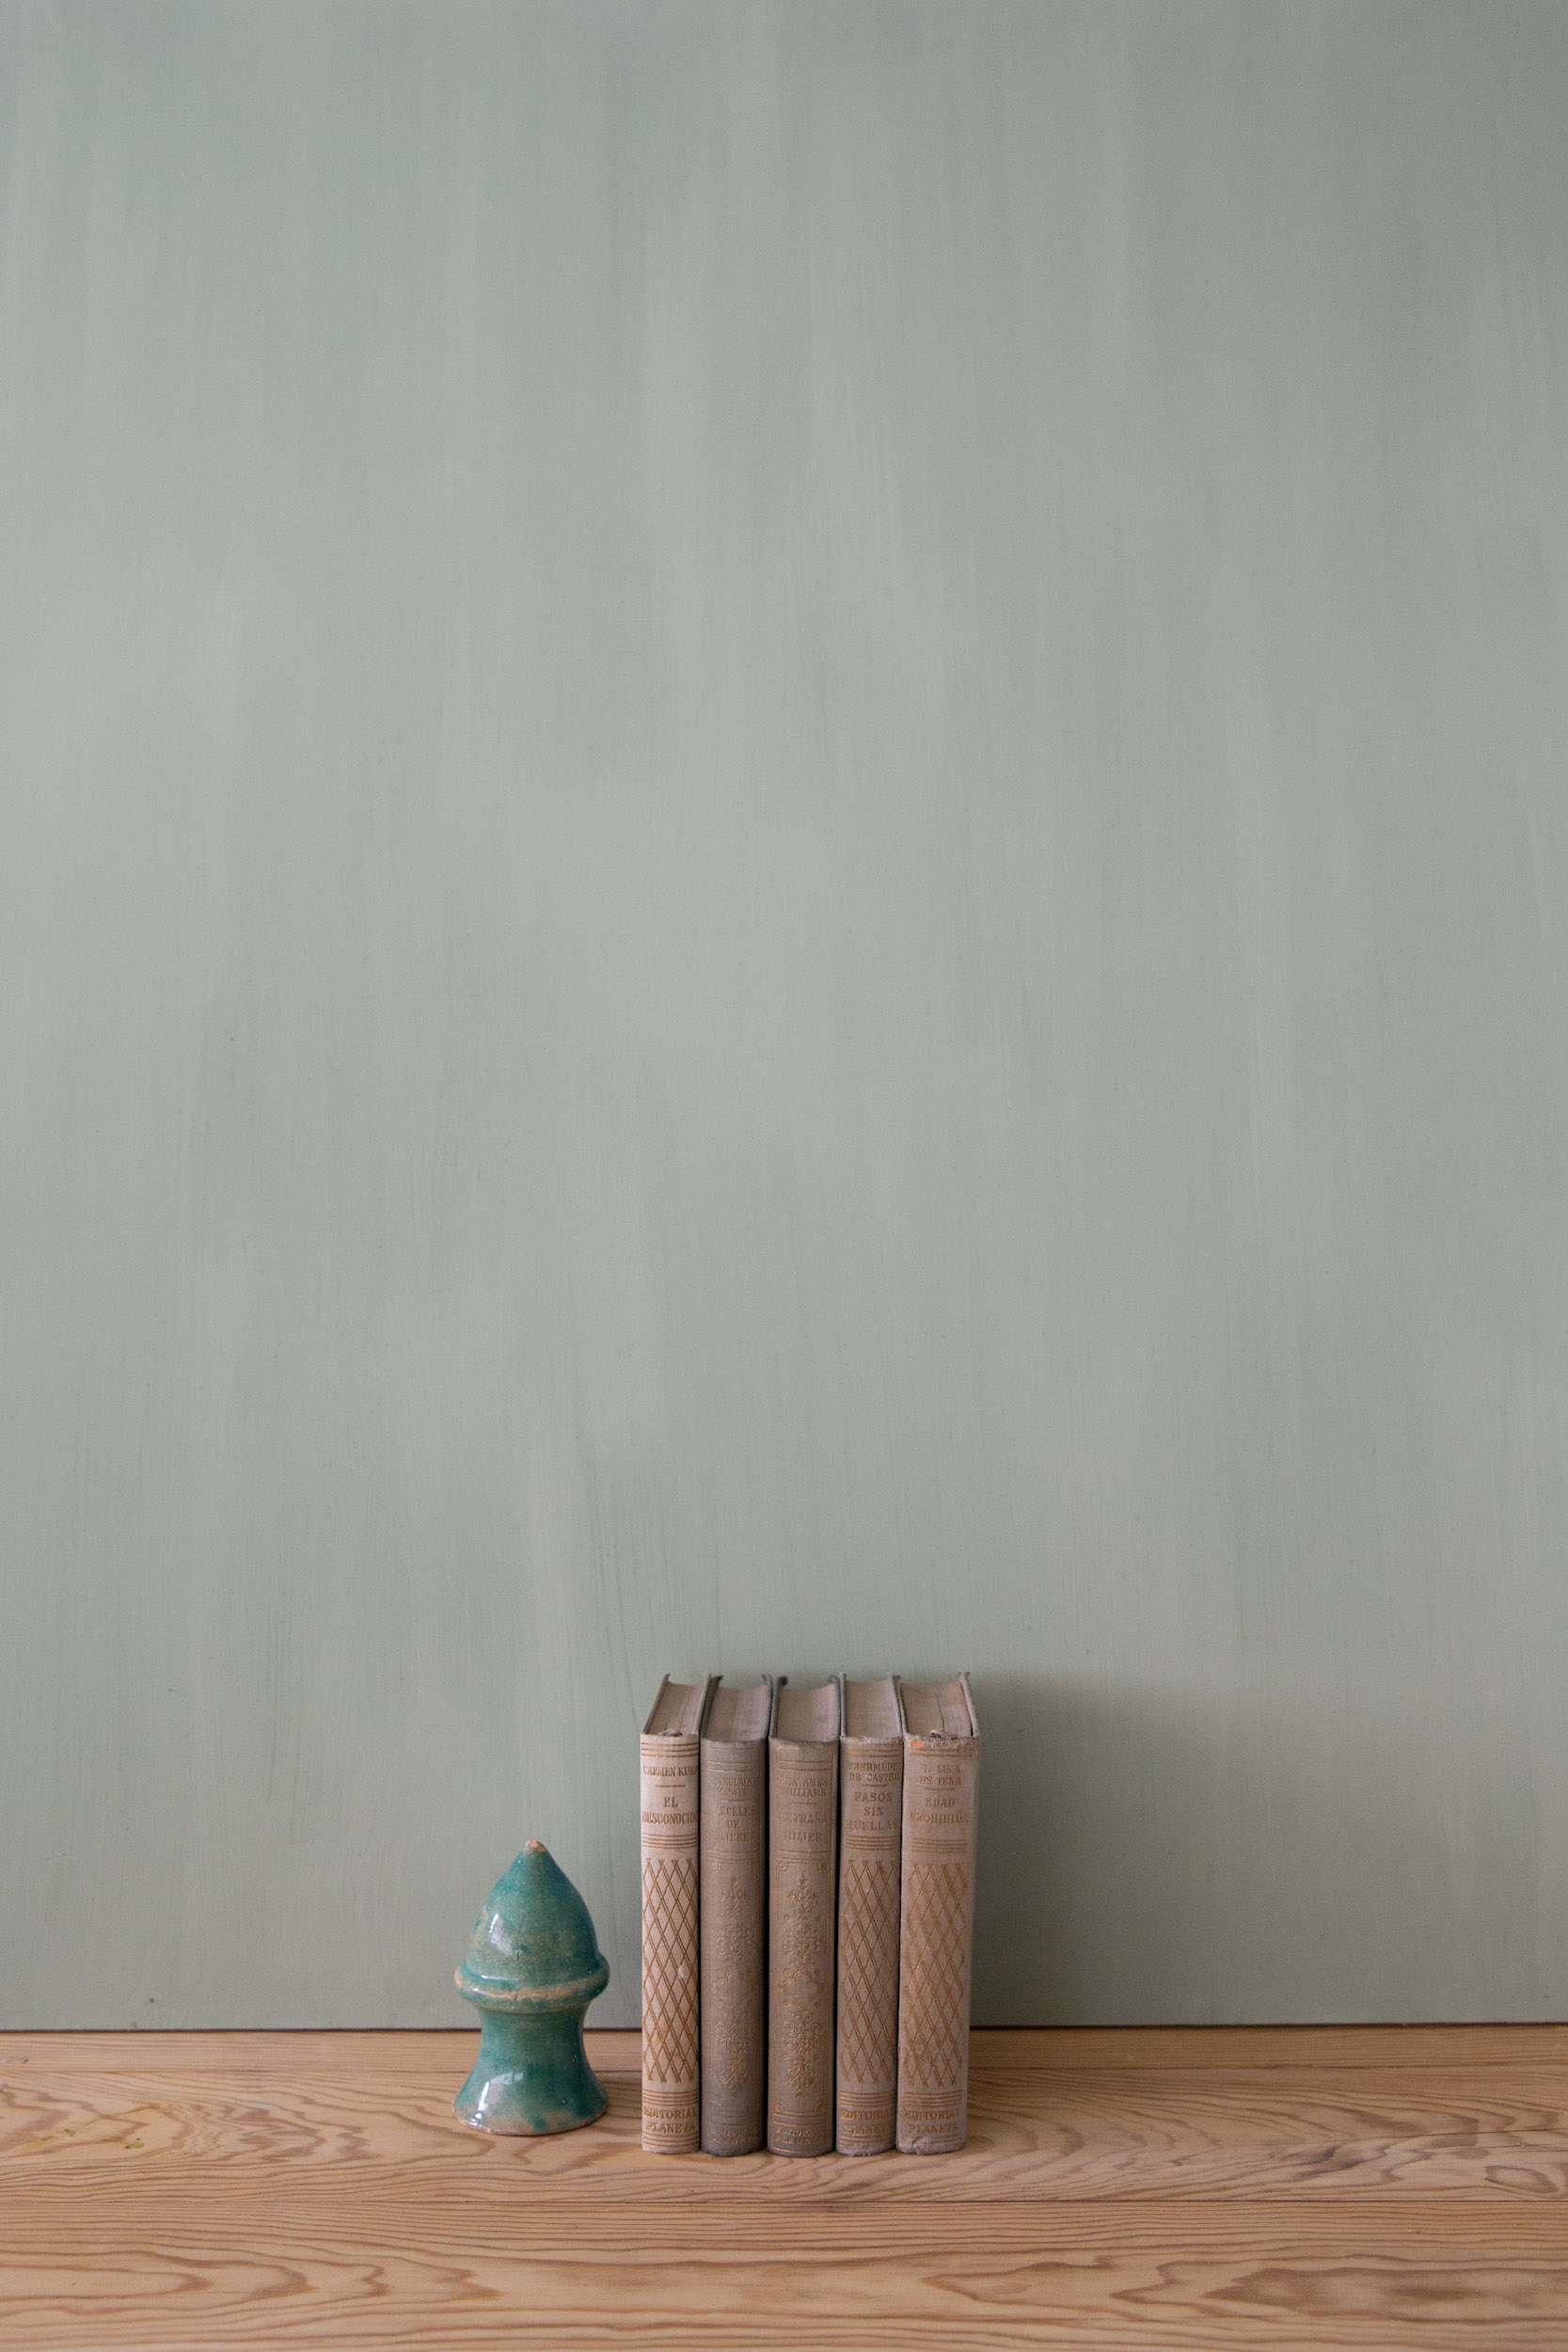 Jade Green by Croma Natural Paint